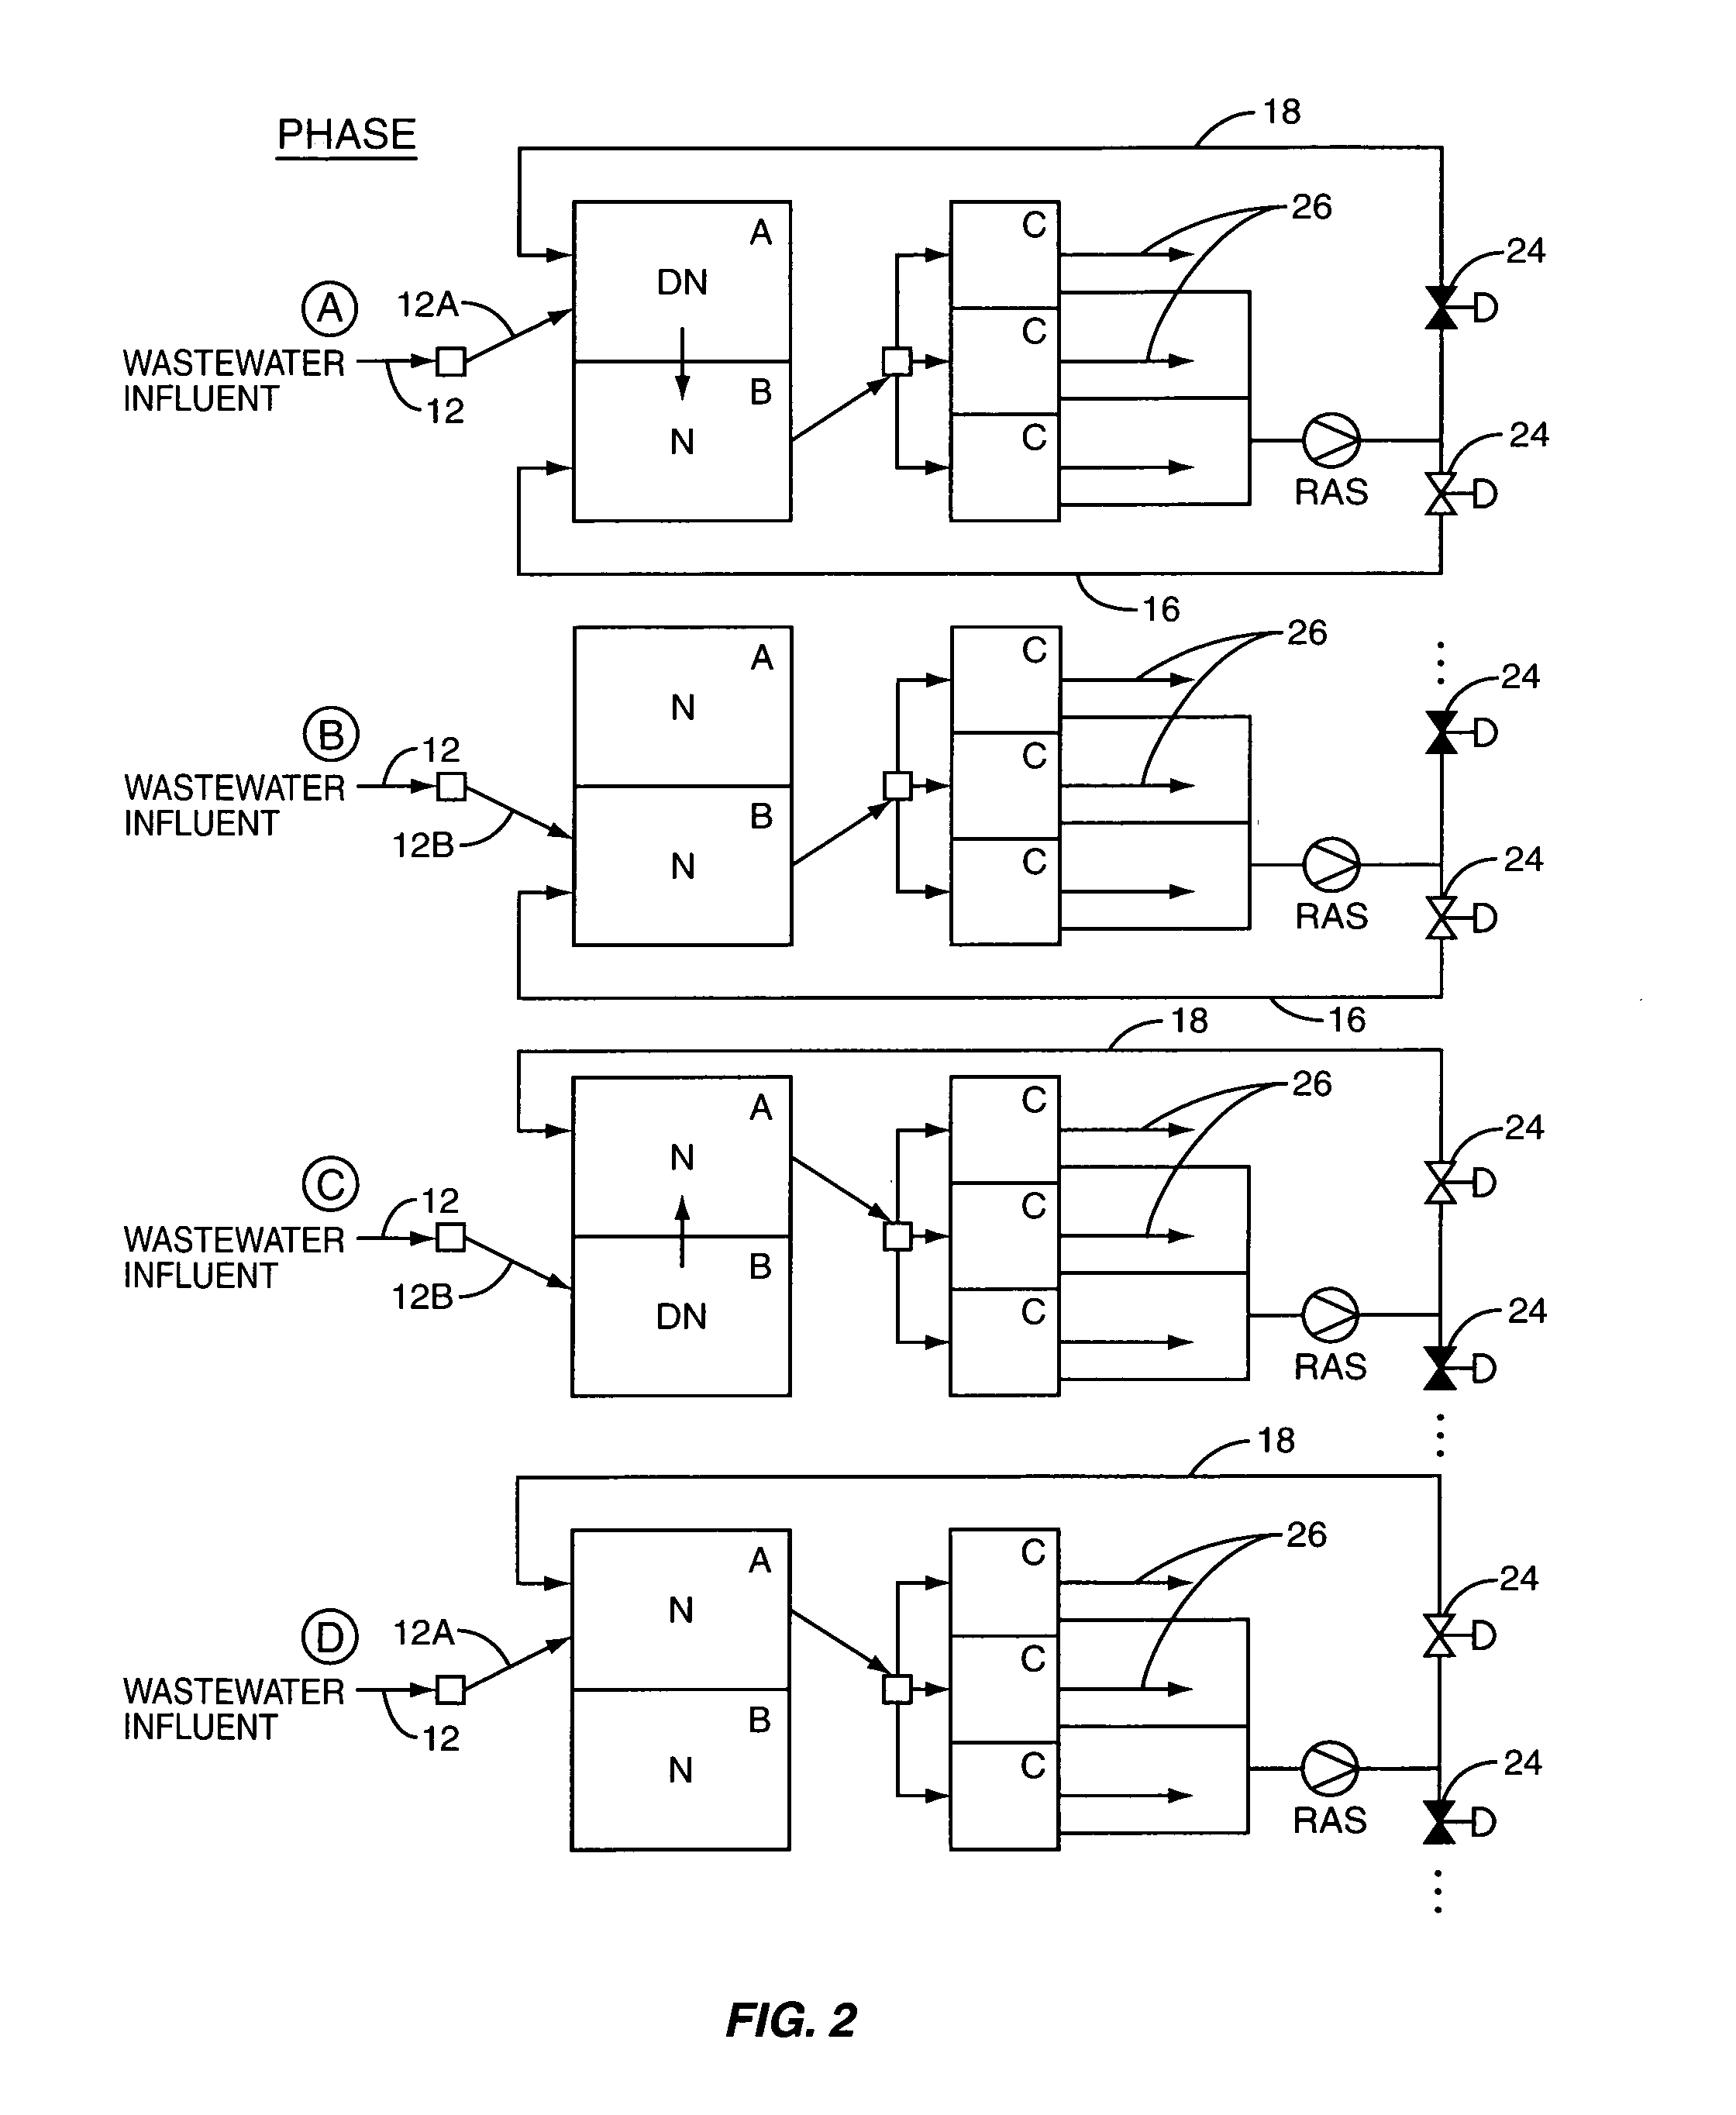 Method and system for nitrifying and denitrifying wastewater